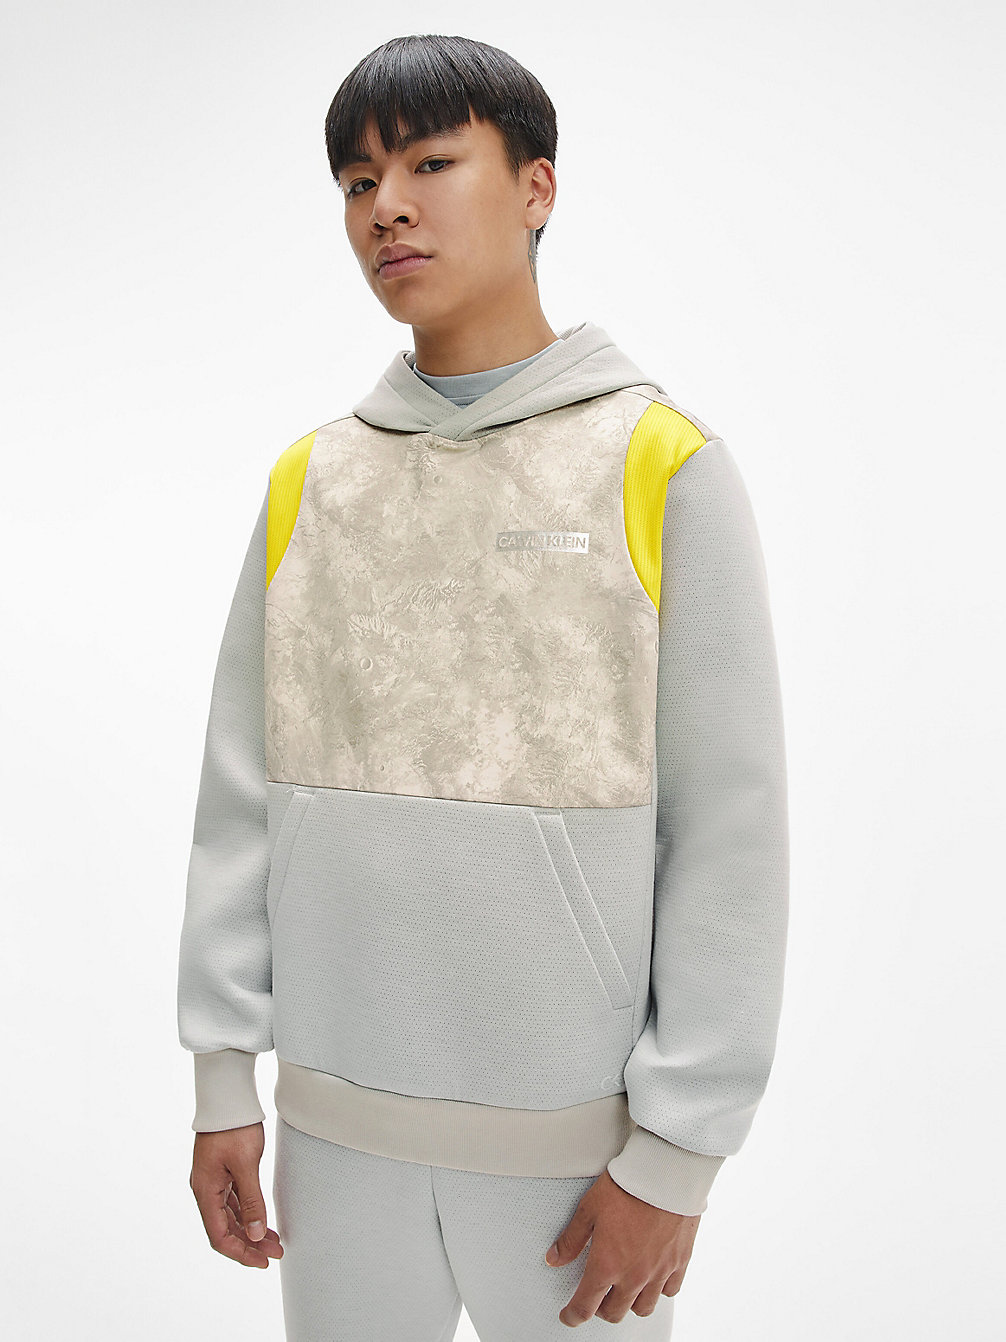 HIGH RISE / CYBER YELLOW Printed Logo Hoodie undefined men Calvin Klein